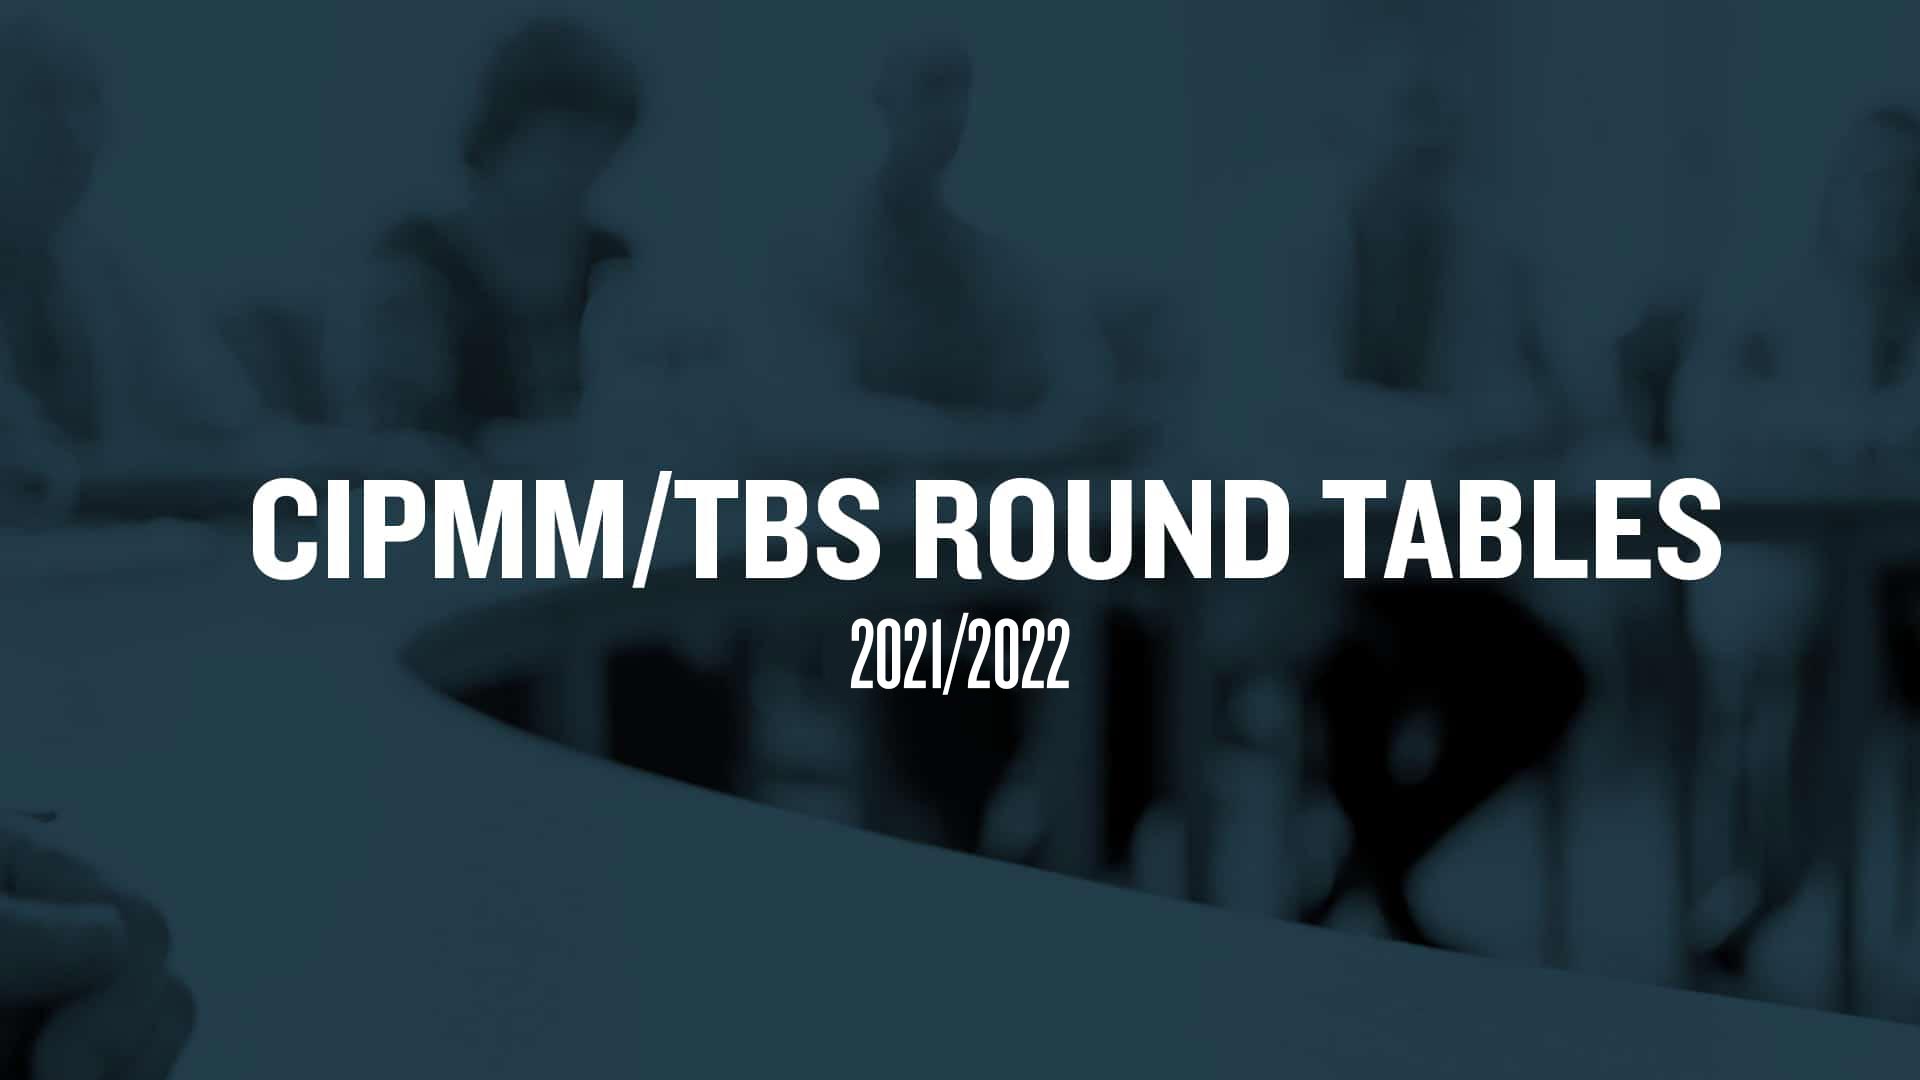 CIPMM/TBS Round Tables 2021-2022